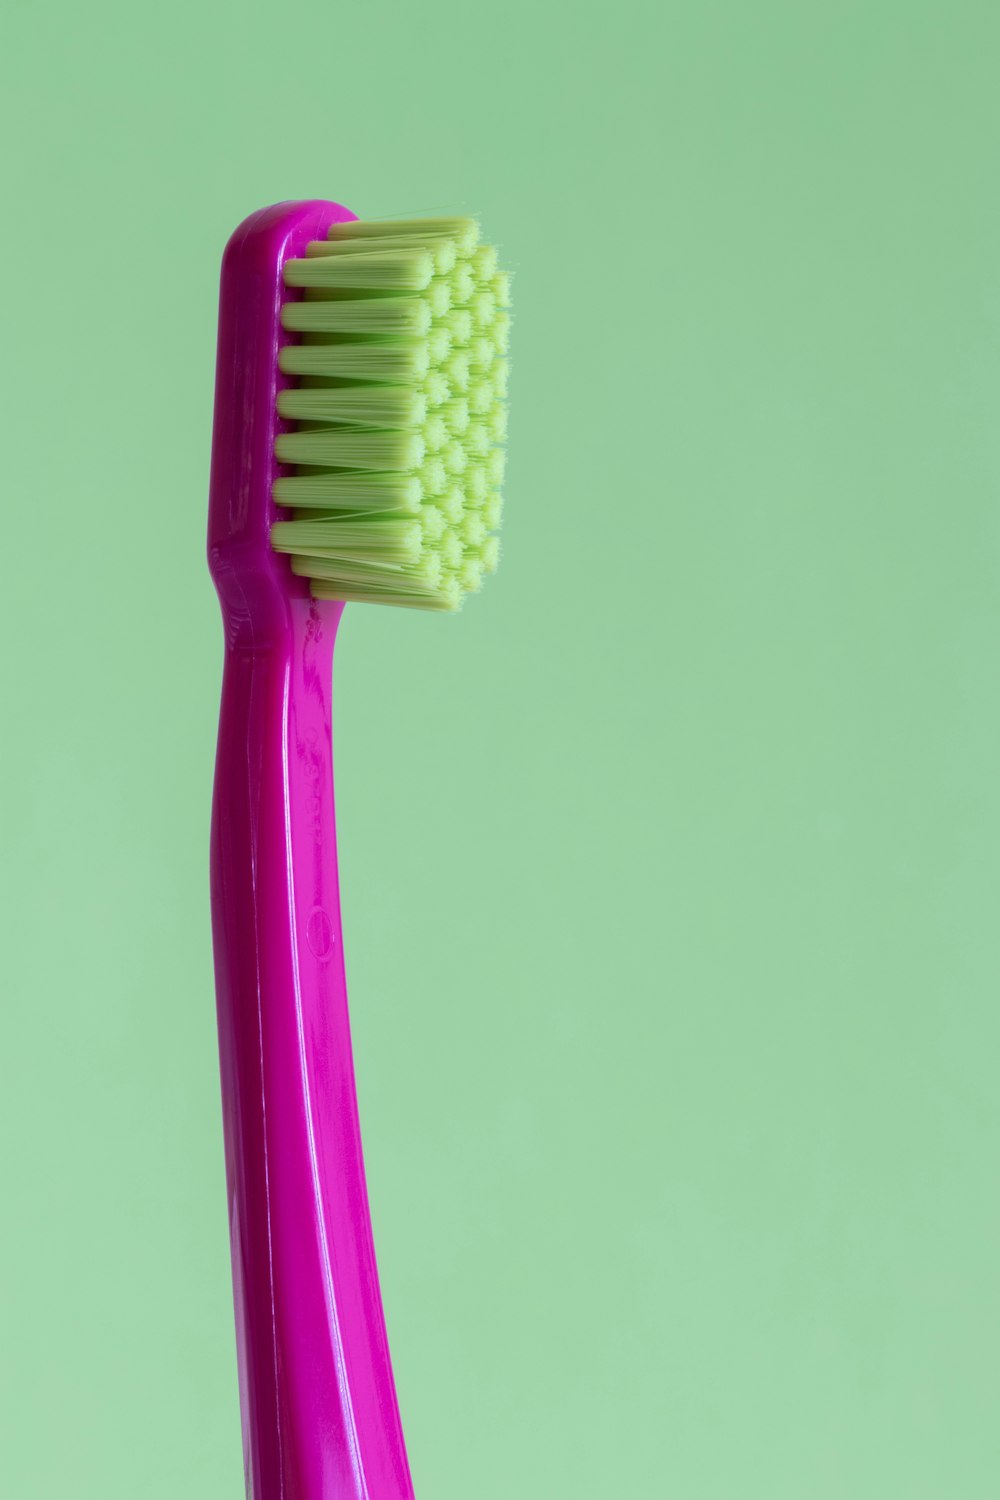 purple and green toothbrush